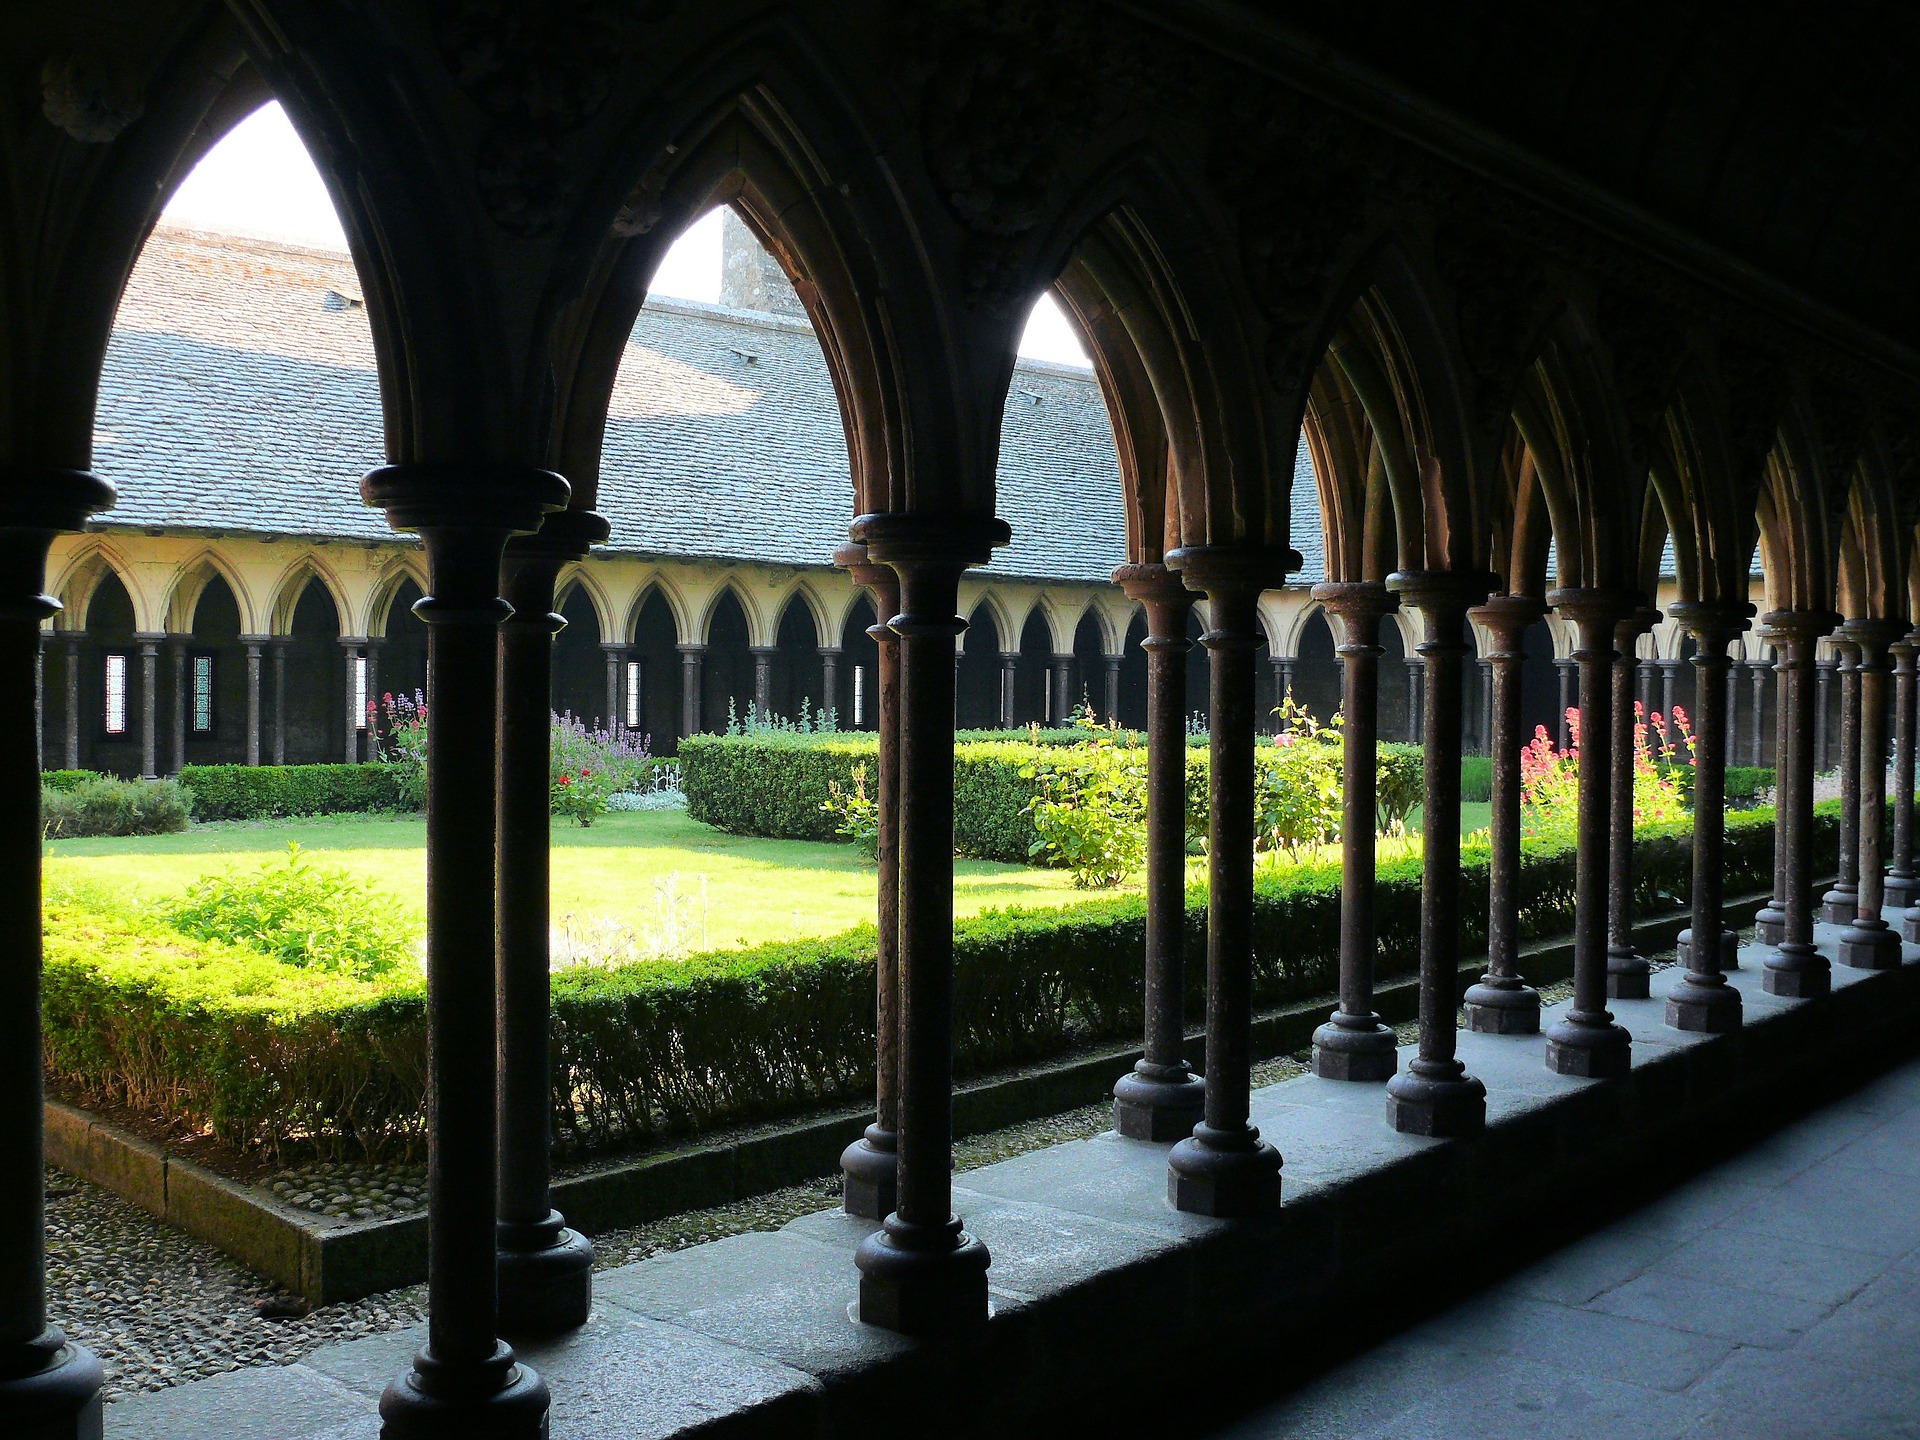 cloister of monastery surrounded by colonnade